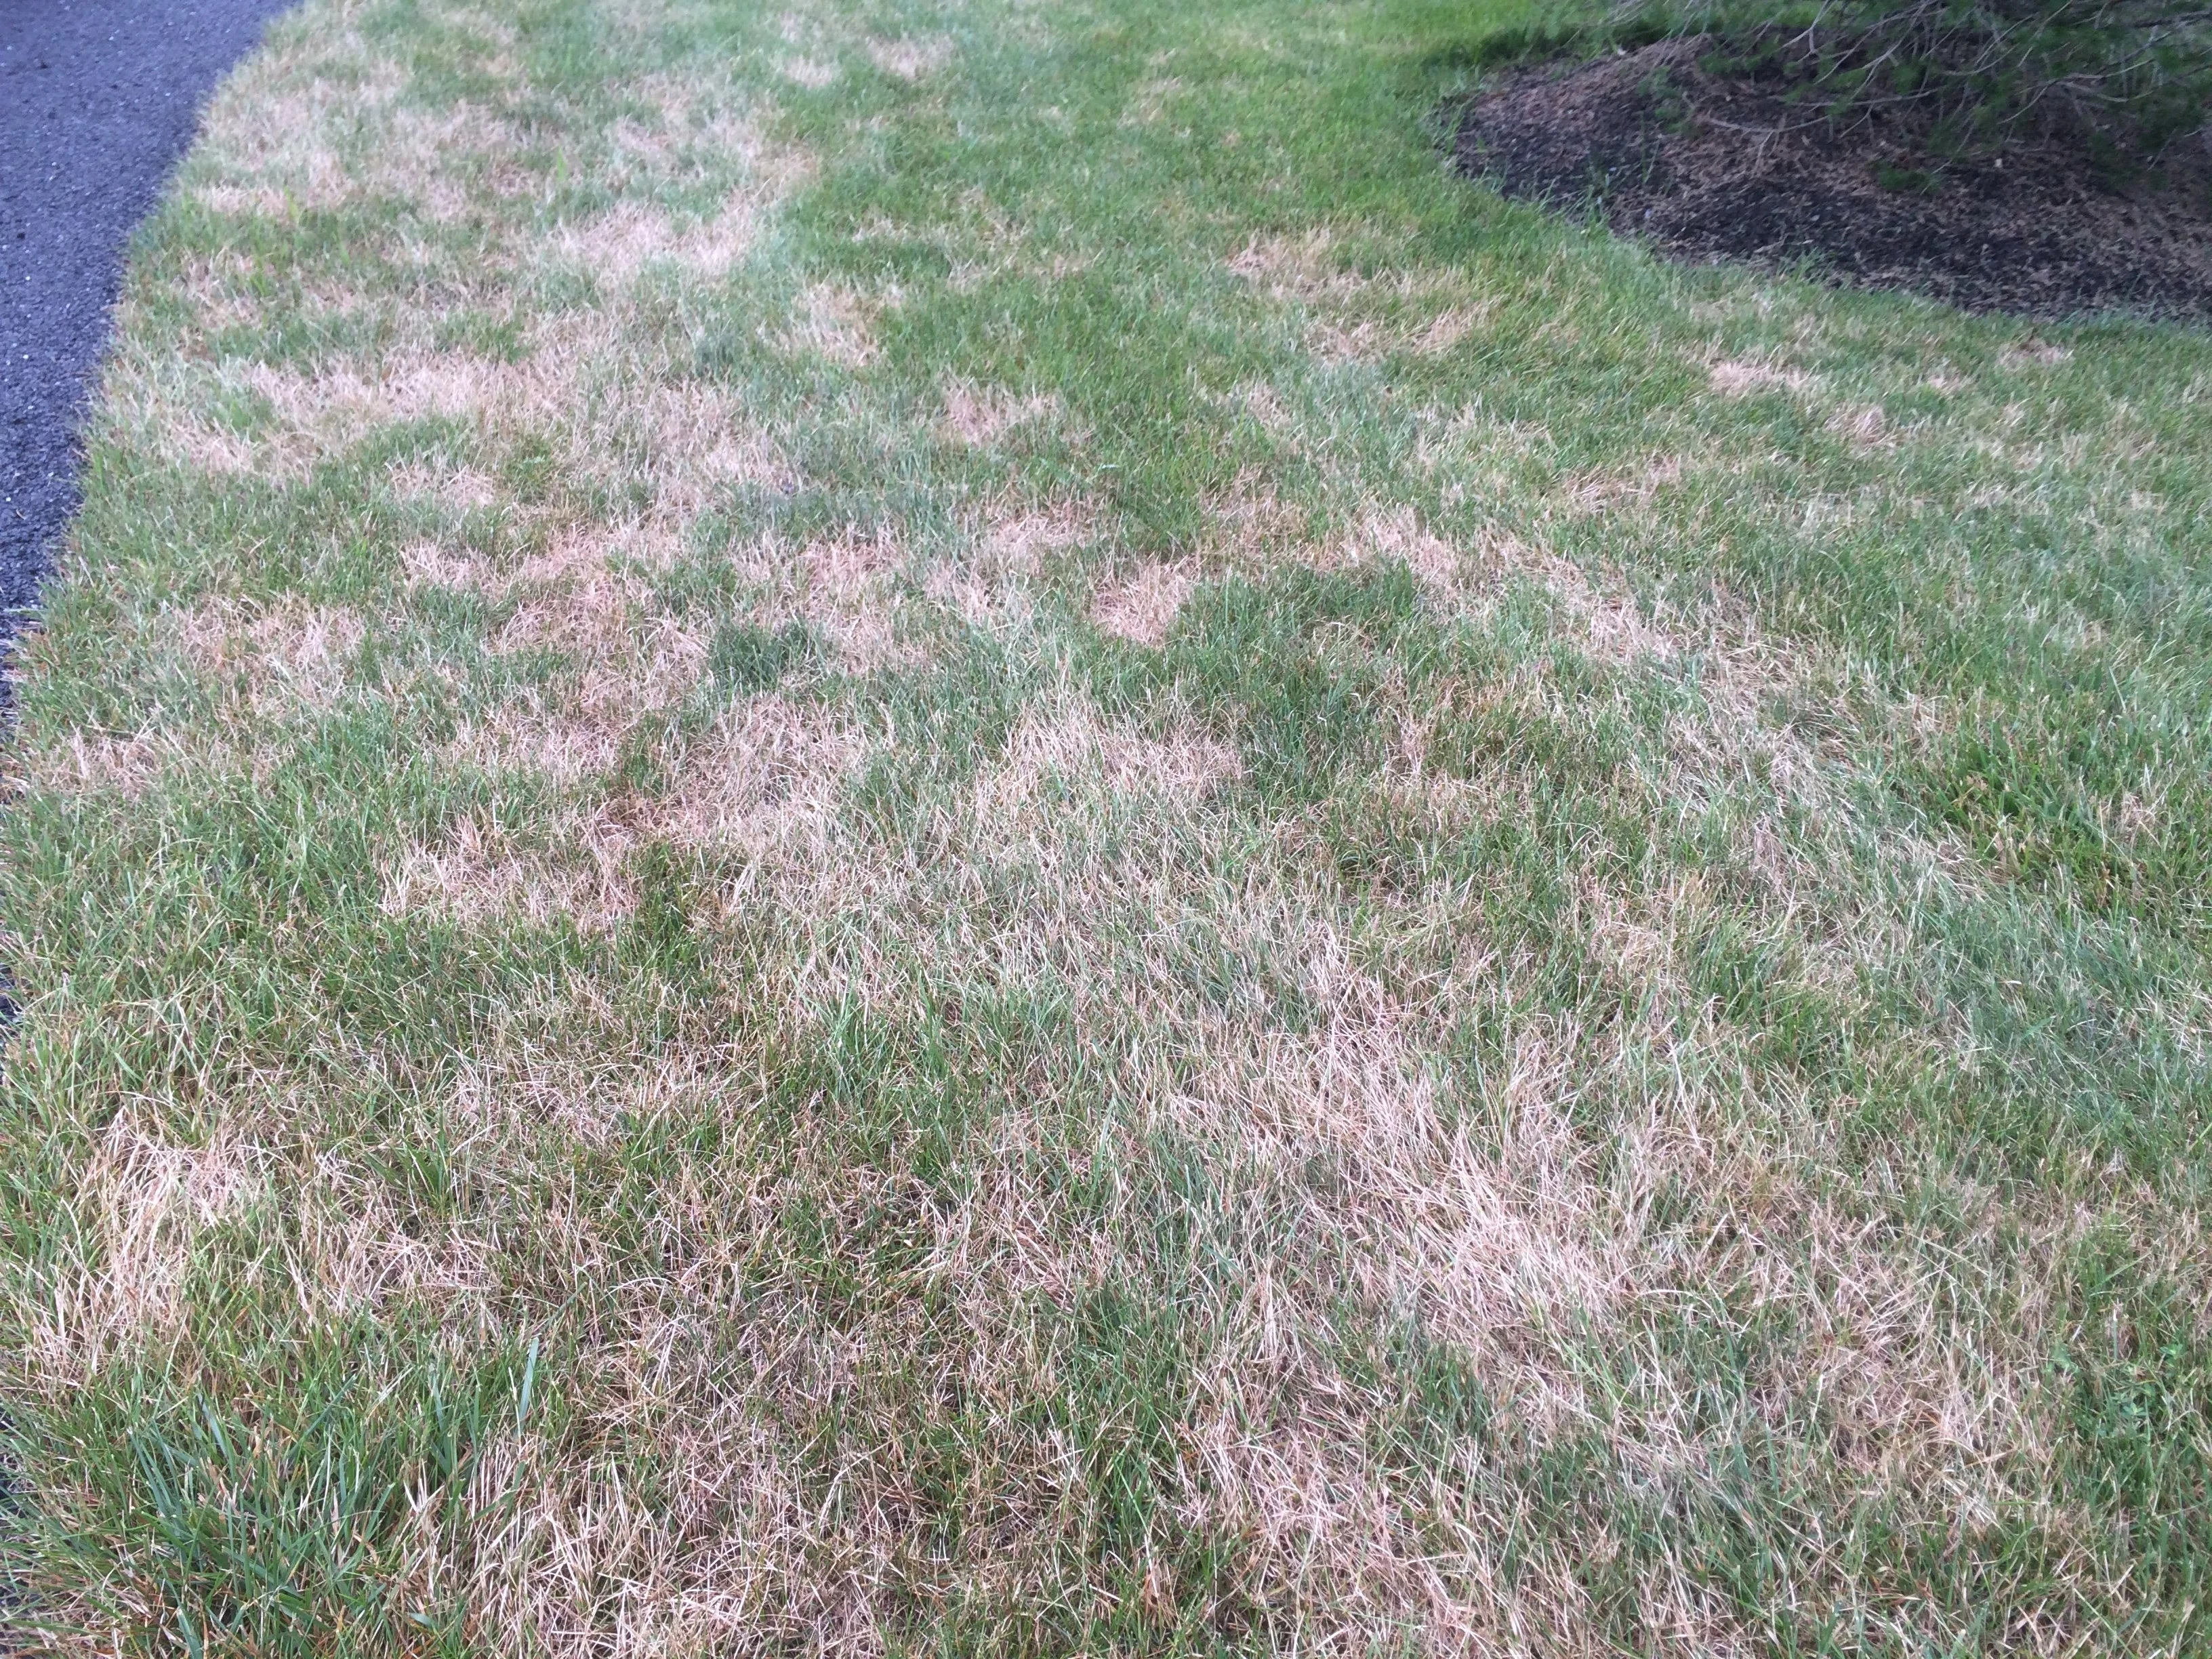 3 Lawn Diseases in Northern Virginia and What To Do About Them